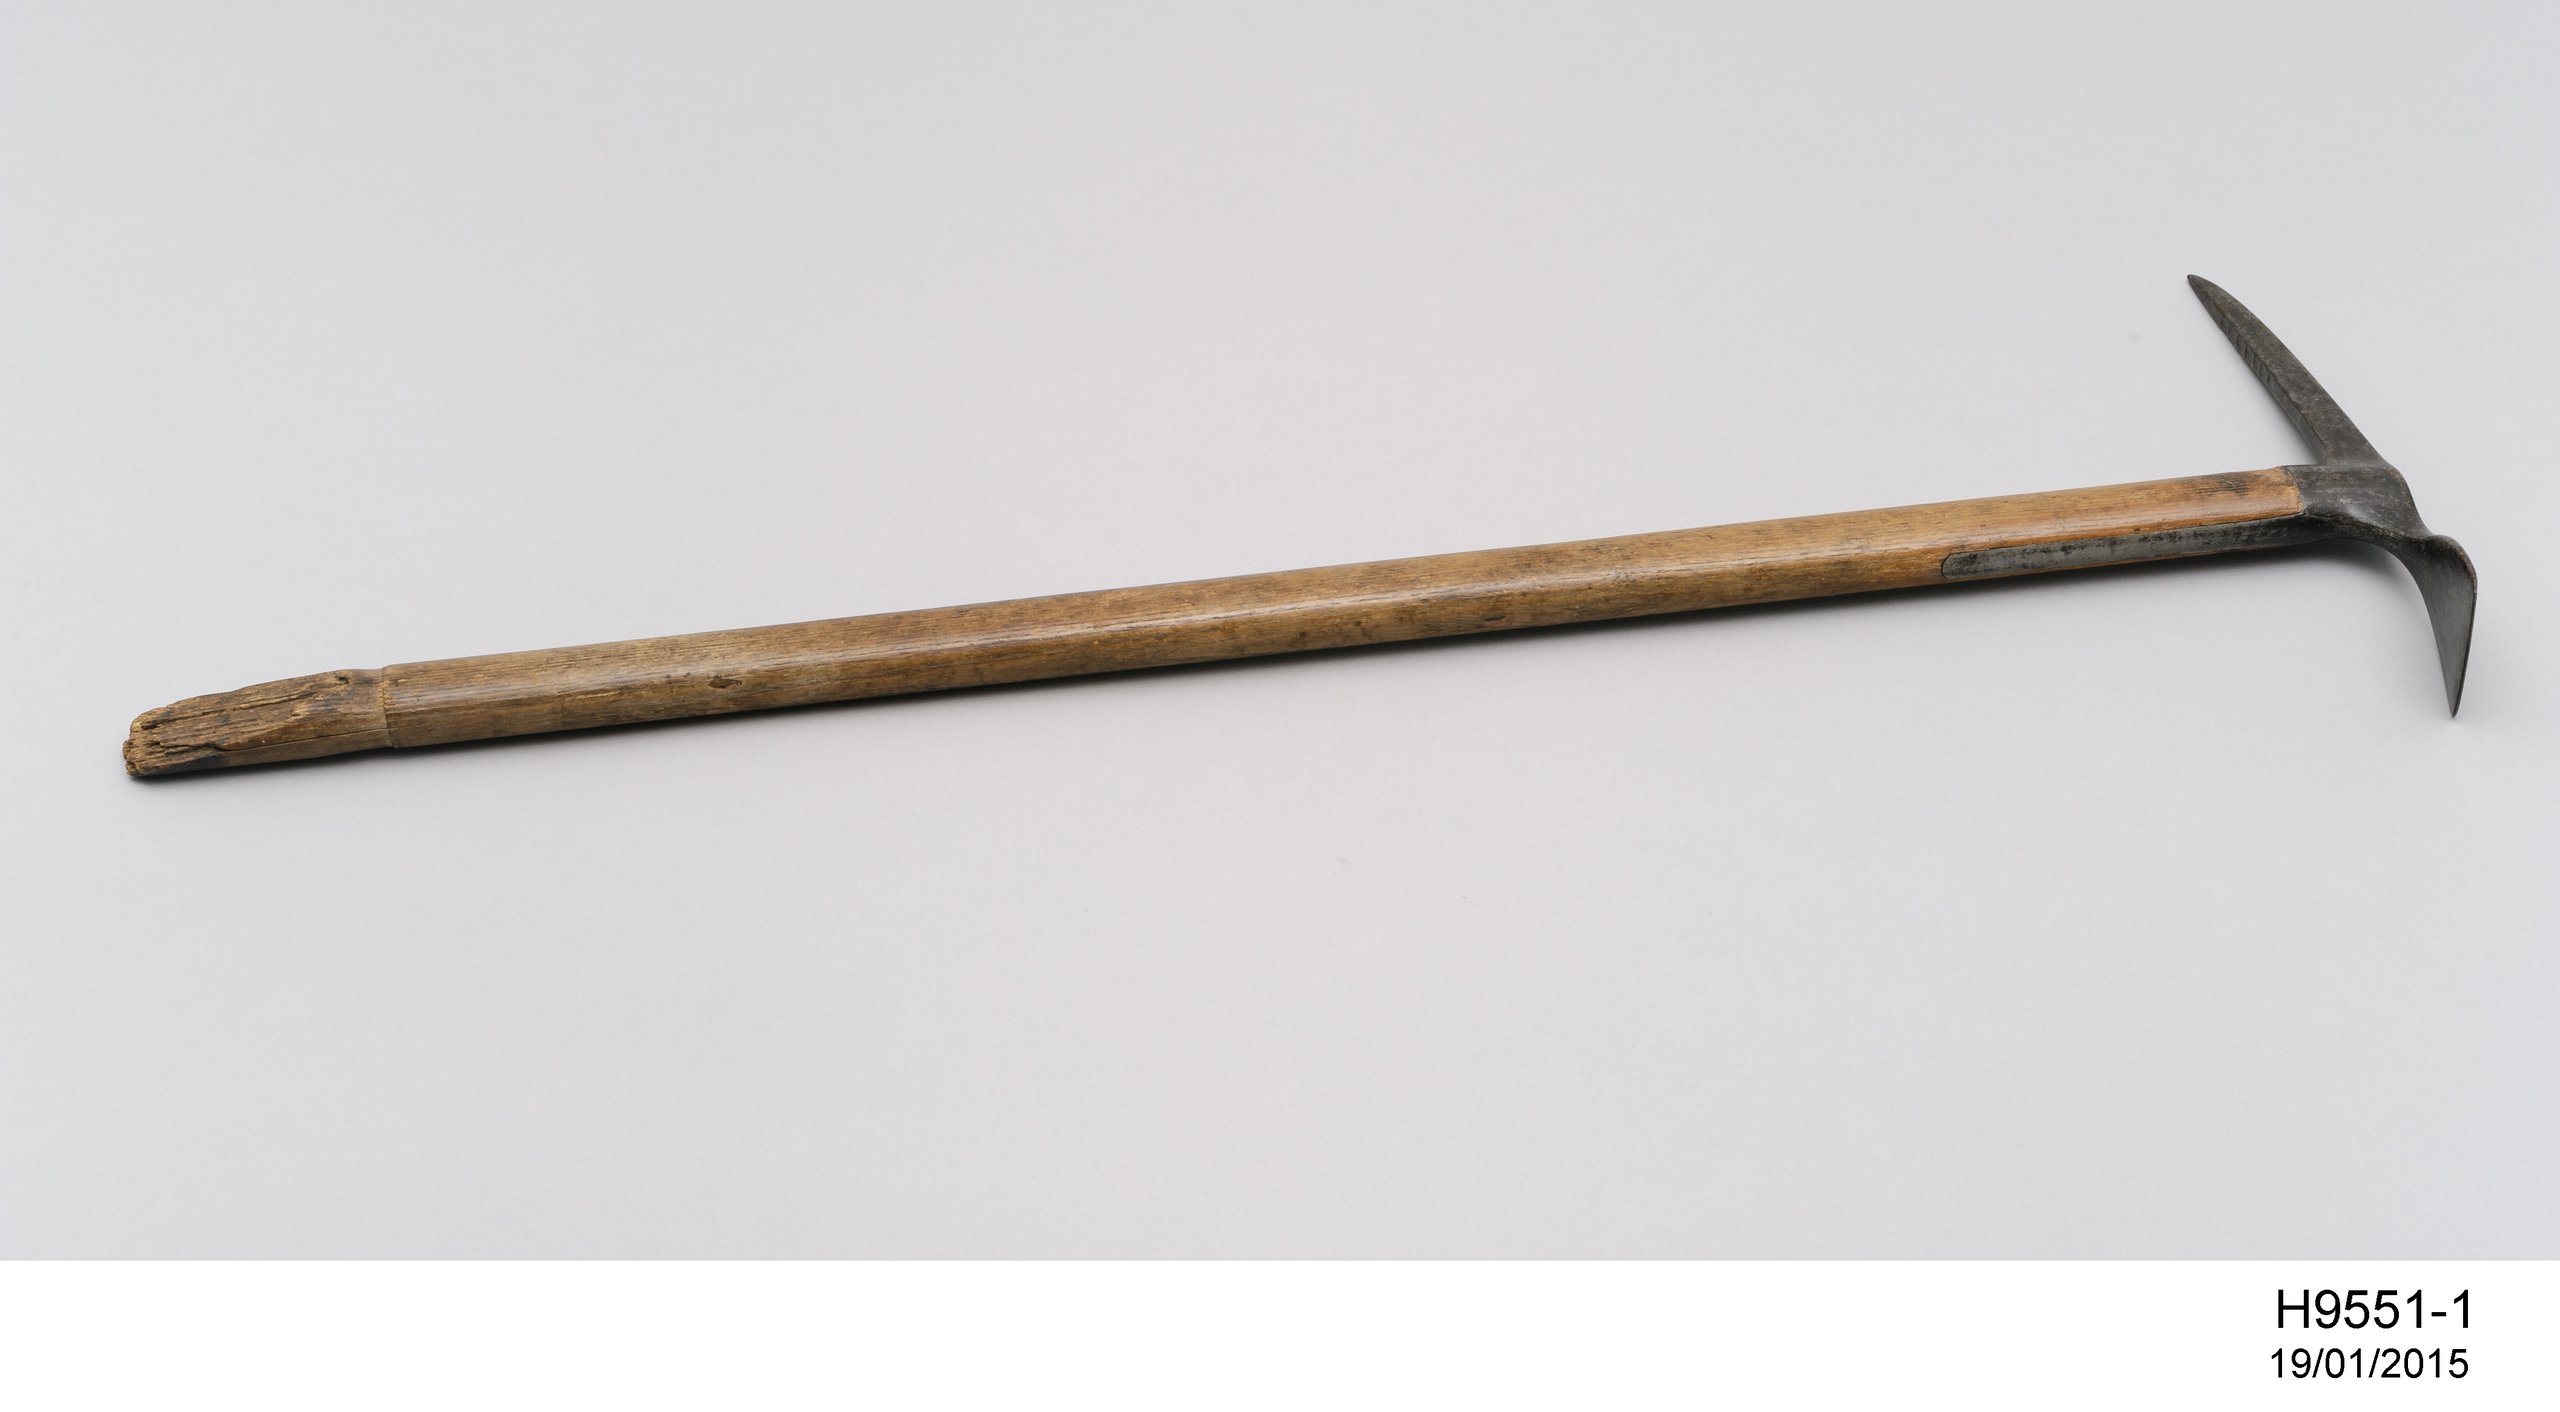 Ice axe used during Sir Dougas Mawson's Australasian Antartic Expedition